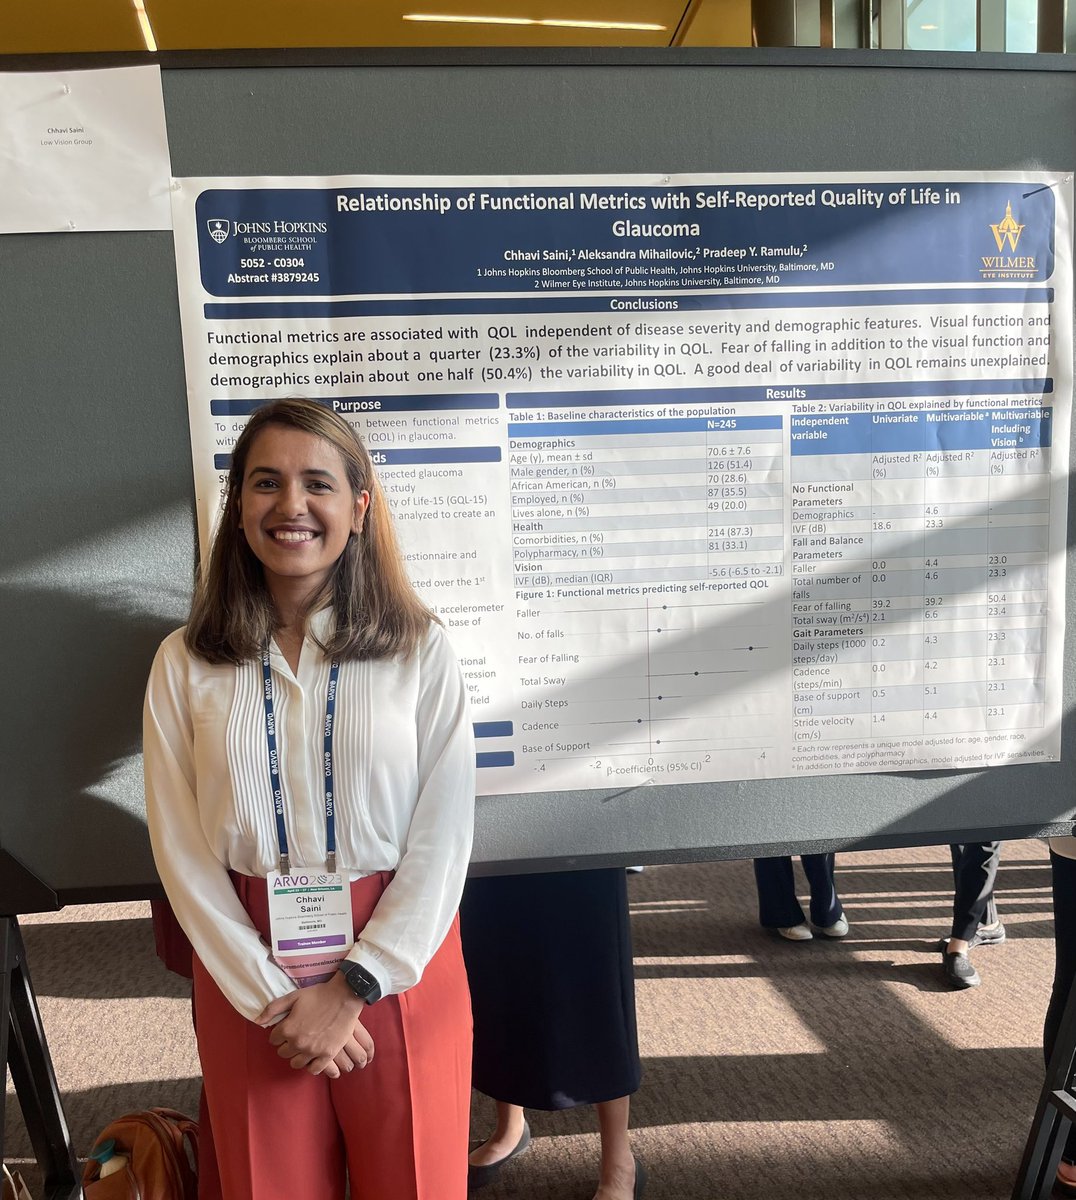 Honored to win the MIT Outstanding Poster Competition in Low Vision section at ARVO 2023 for my research on functional metrics & quality of life in glaucoma patients. Huge thanks to my mentor, Dr. Ramulu, for his invaluable guidance and support. #arvo2023 #Ophthalmology #Glaucoma